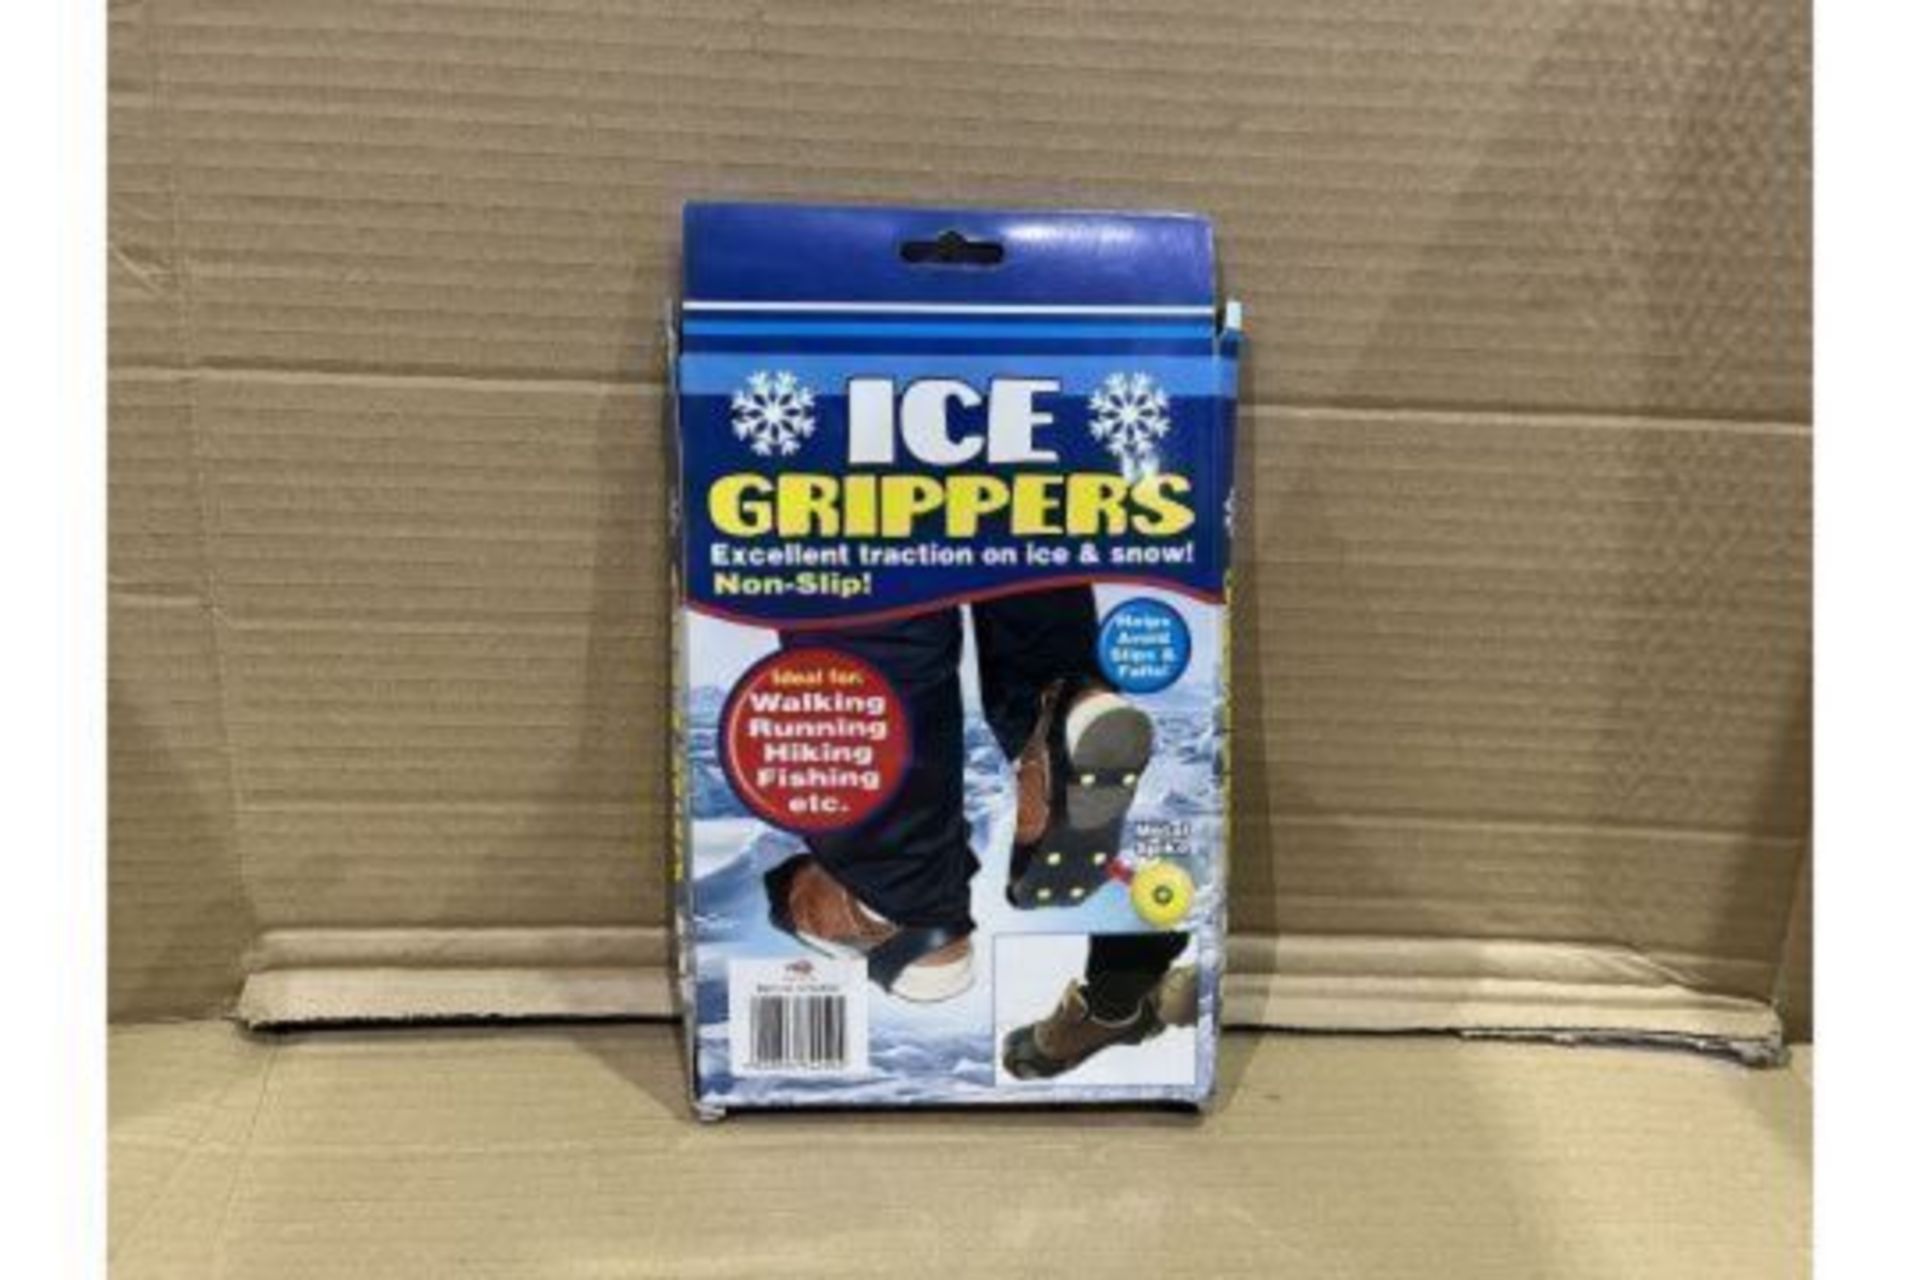 48 X BRAND NEW ICE GRIPPERS EXCELLENT FOR TRACTION ON ICE AND SNOW R15